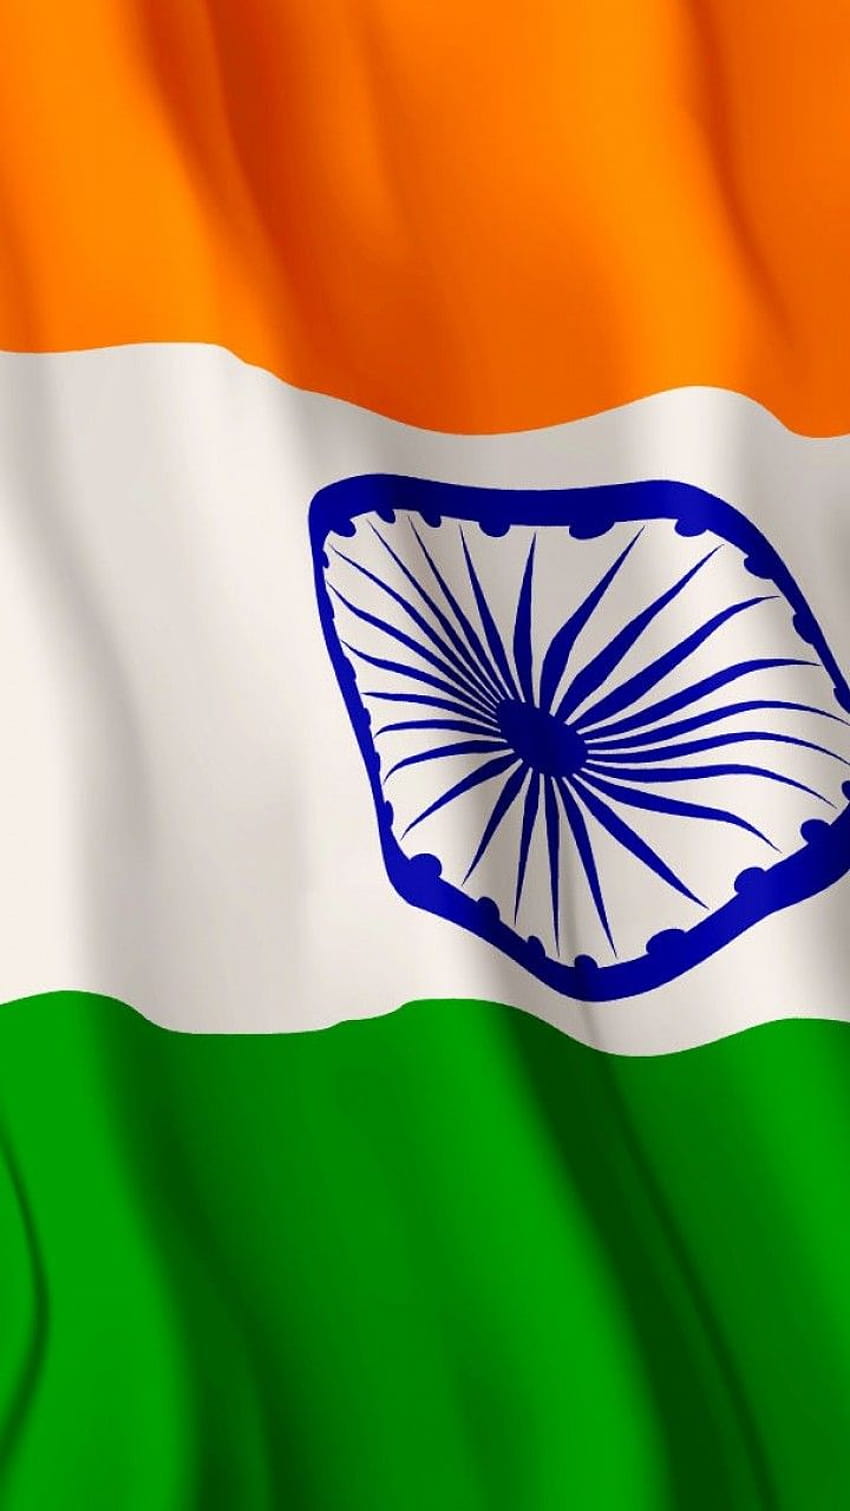 PM Narendra Modi appeal to participate Har Ghar Tiranga Campaign upload  selfie with flag all details